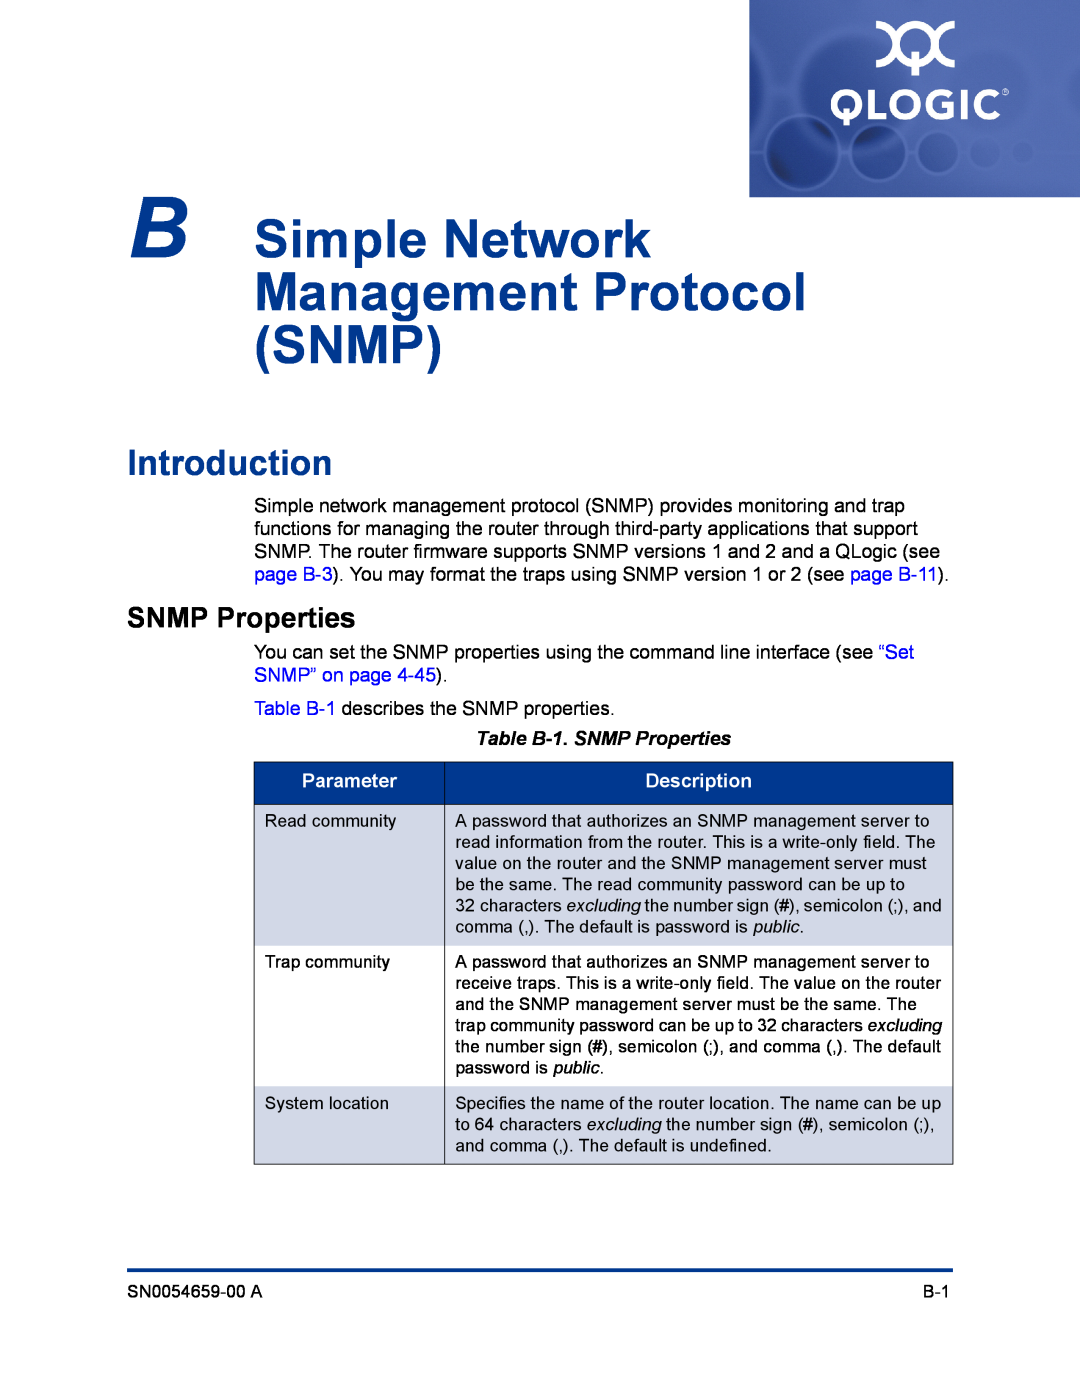 Q-Logic ISR6142 manual B Simple Network Management Protocol SNMP, Introduction, Table B-1. SNMP Properties, Parameter 